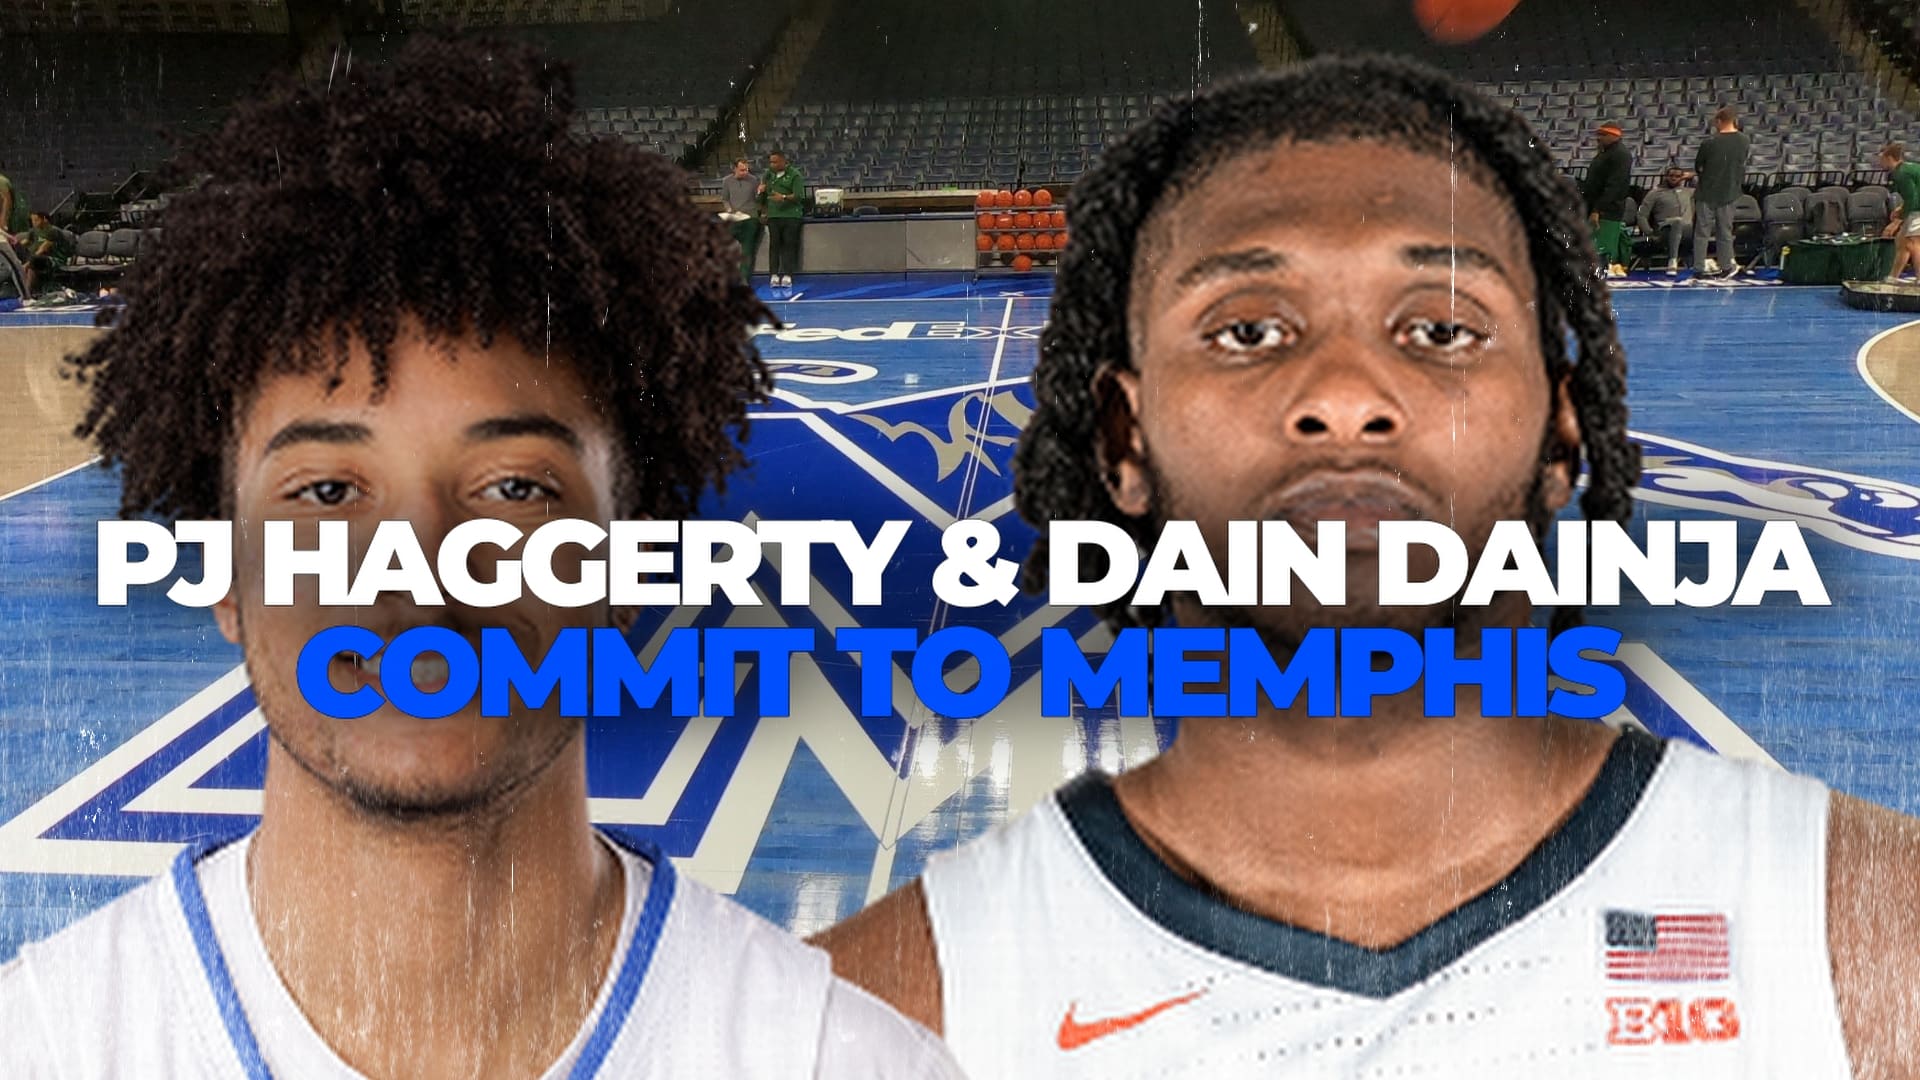 Featured image for “PJ Haggerty & Dain Dainja Commit to Memphis”